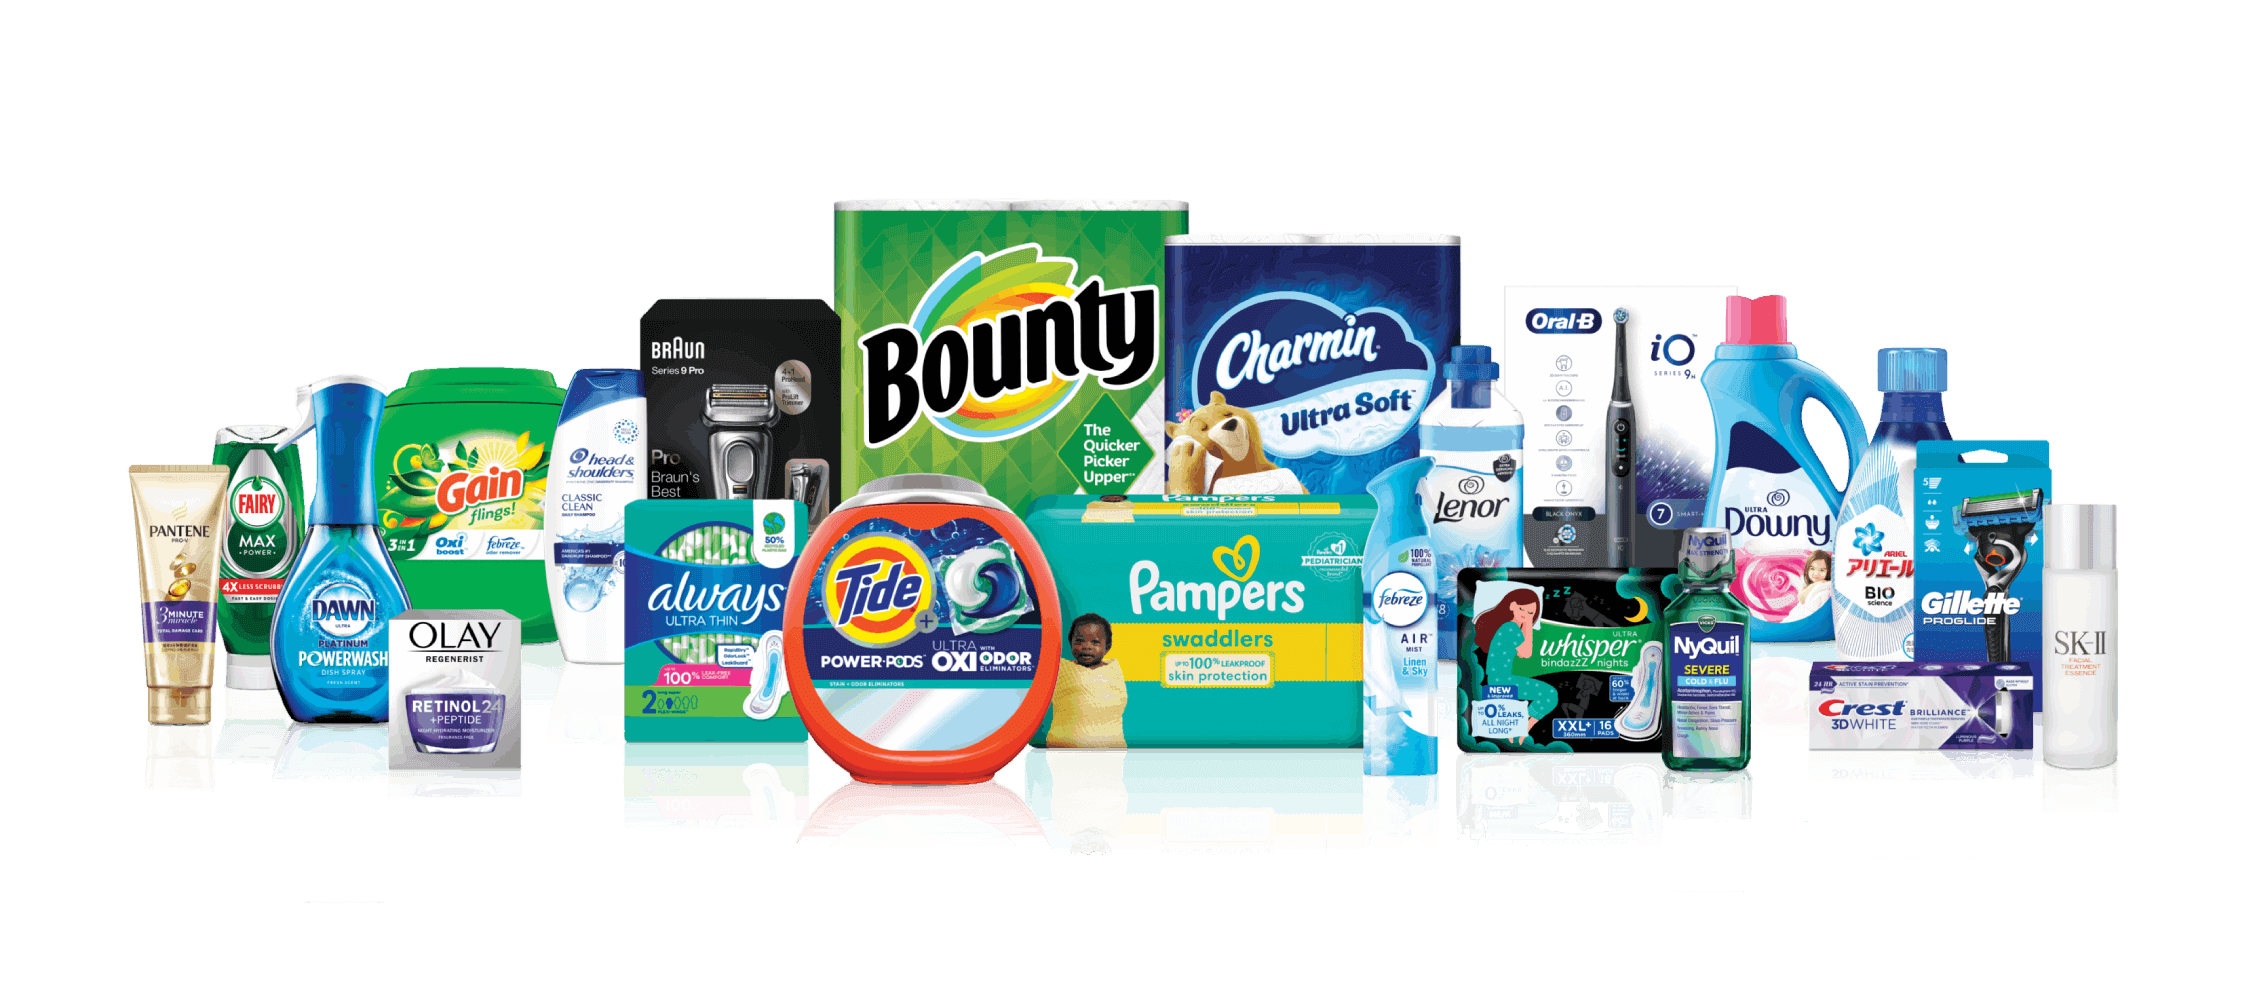 P&G Brands And Products - FourWeekMBA